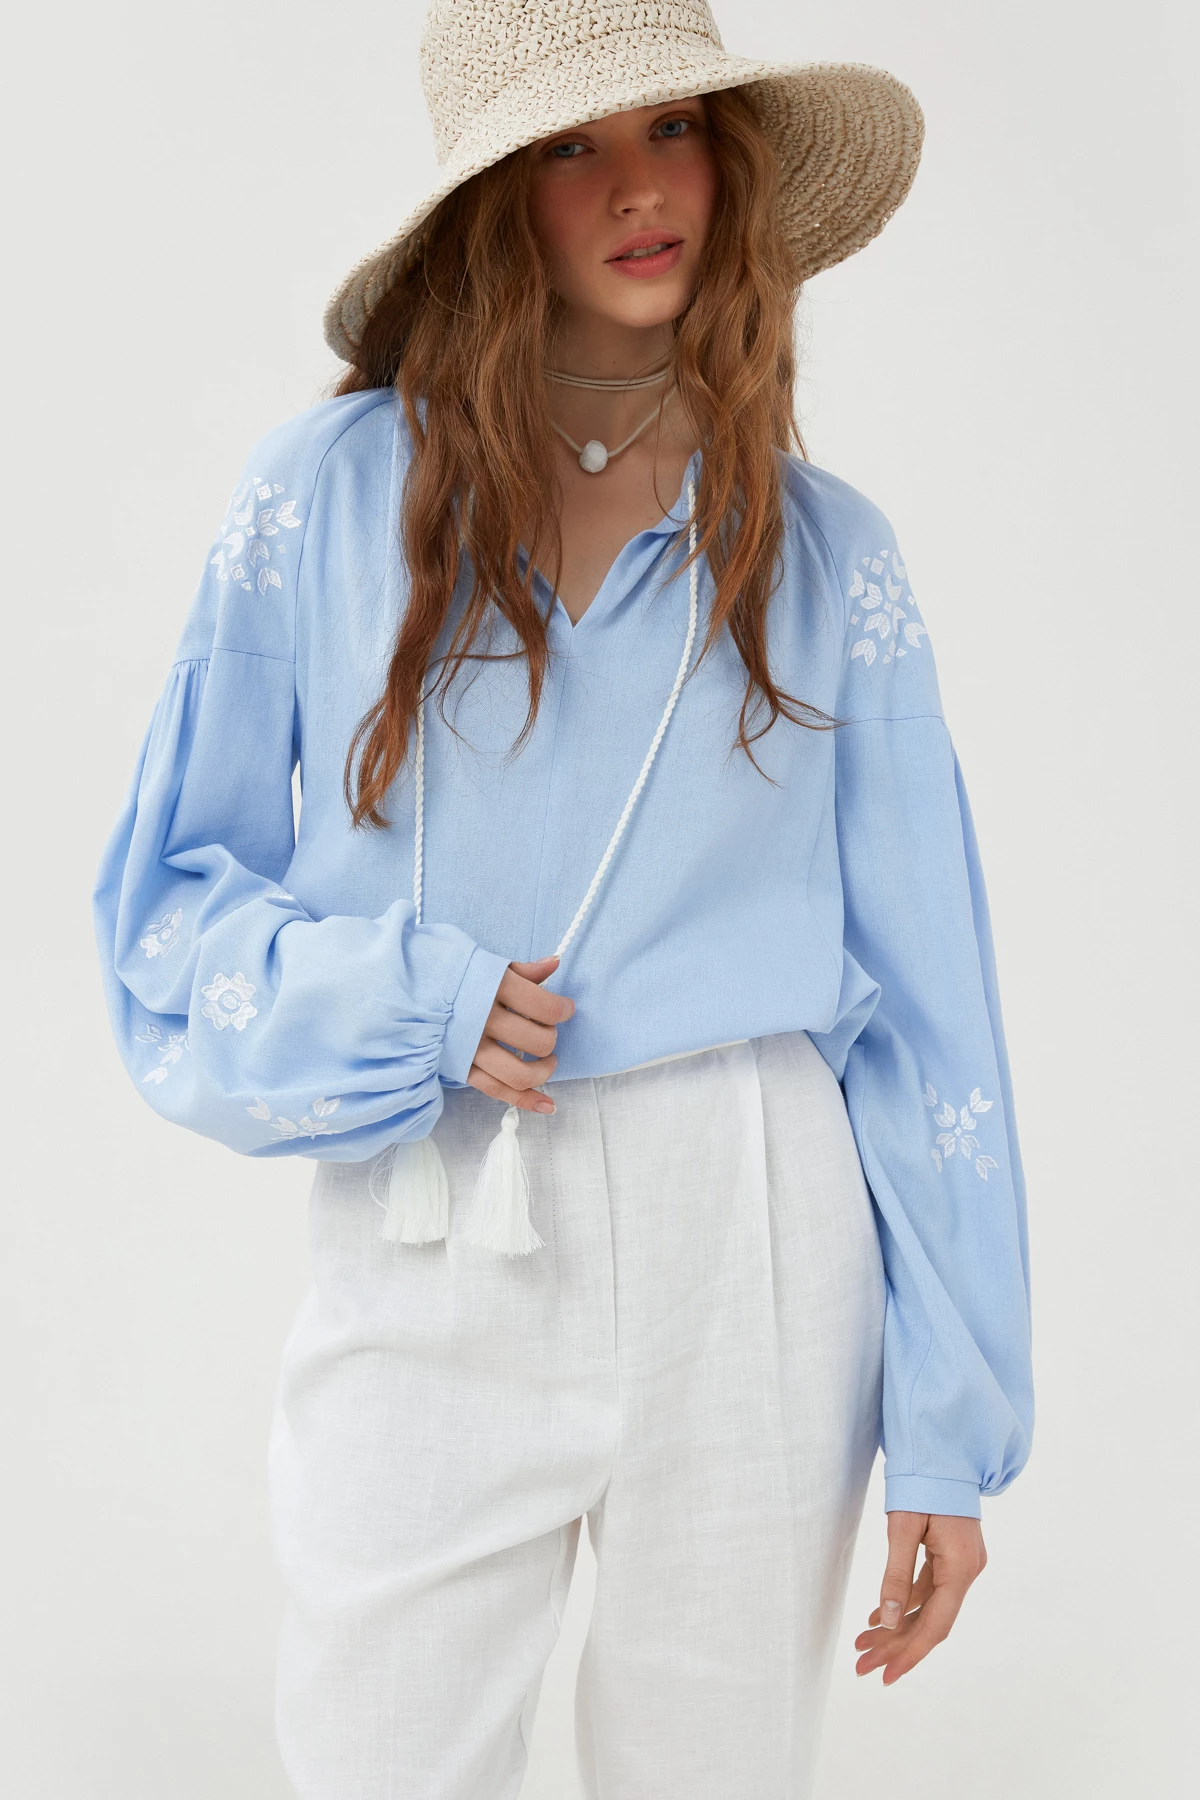 Embroidered shirt "Malvy" with blue linen, photo 1